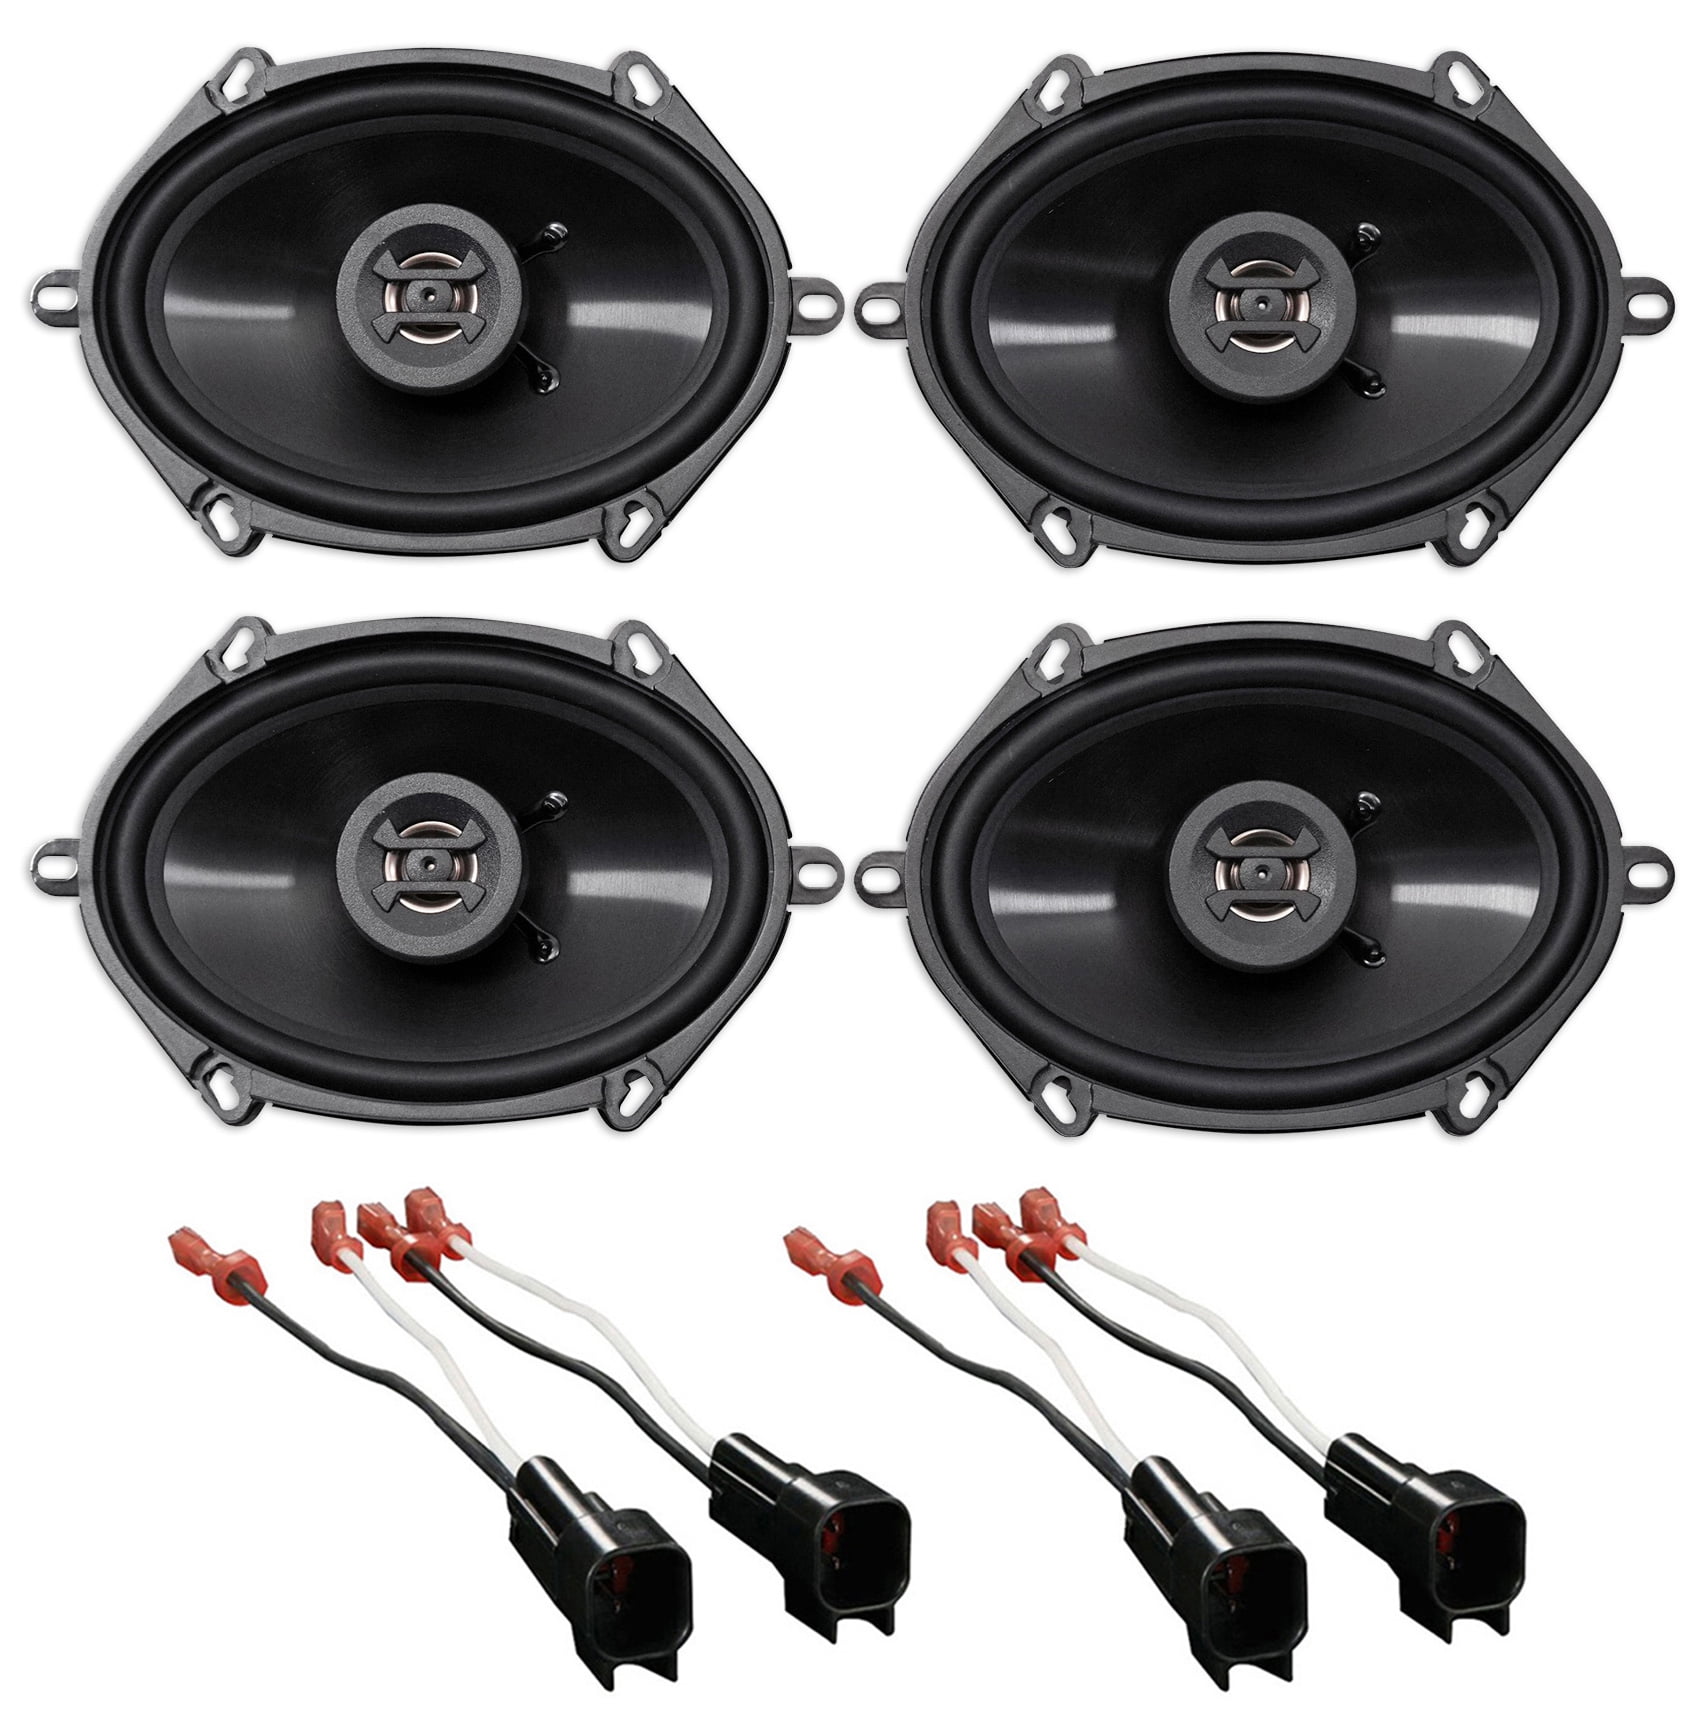 New Front Kicker 6x8" Factory Speaker Replacement Kit For 1994-1997 Ford Ranger 